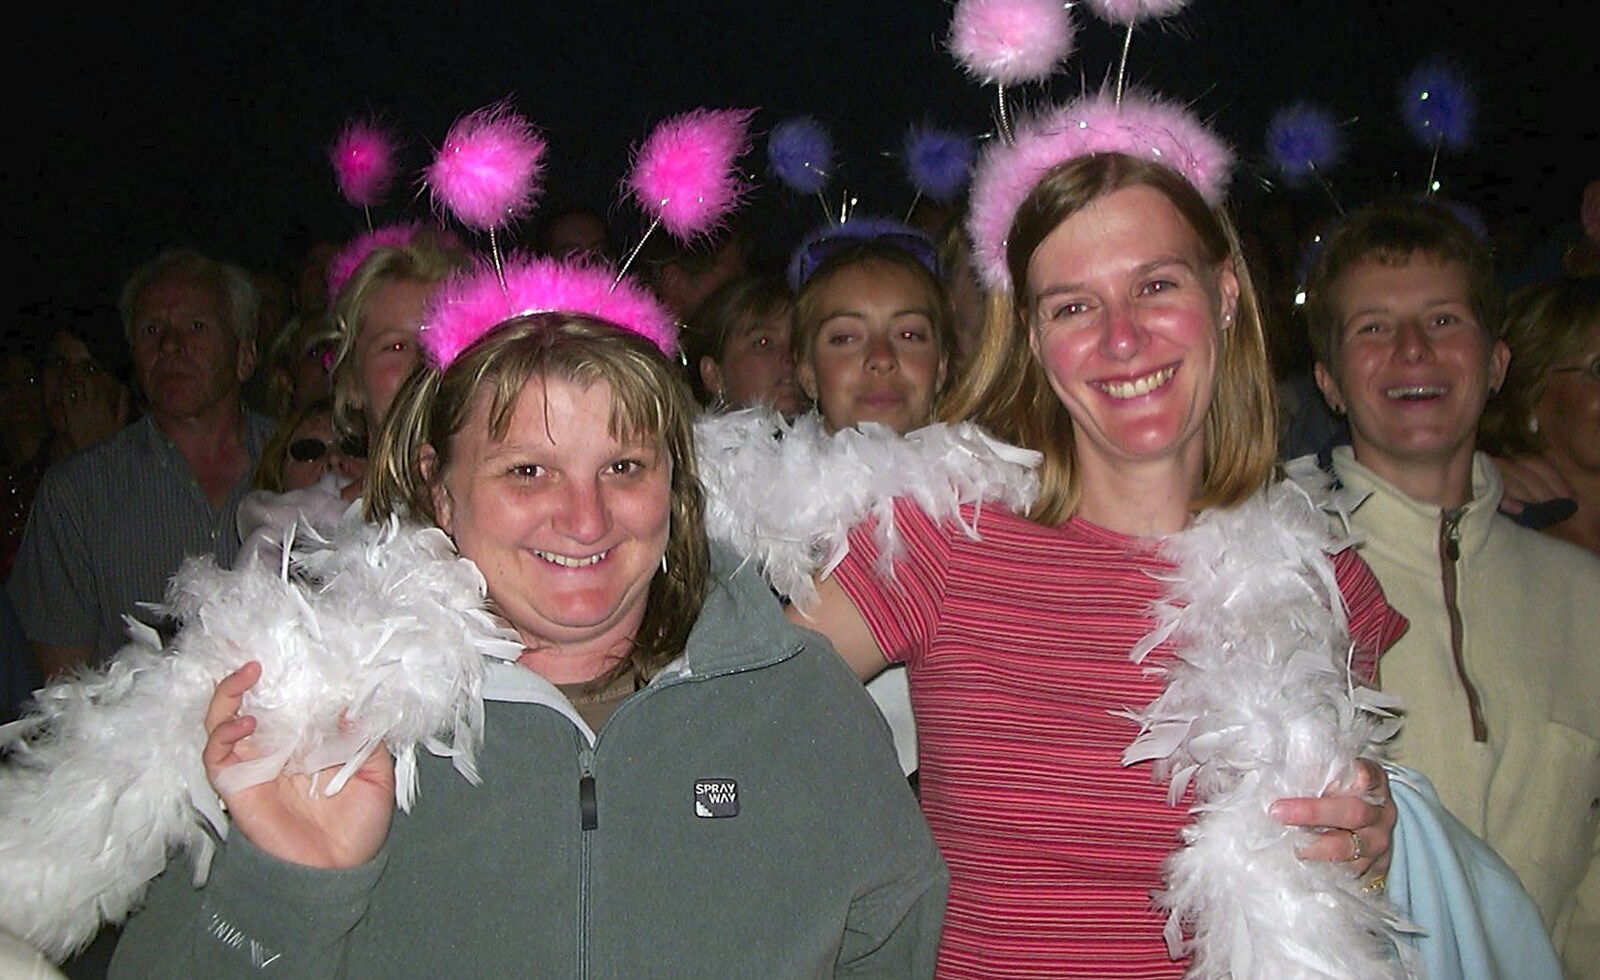 Some of the crowd from 3G Lab at Jools Holland, Audley End, Saffron Walden, Essex - 25th July 2004